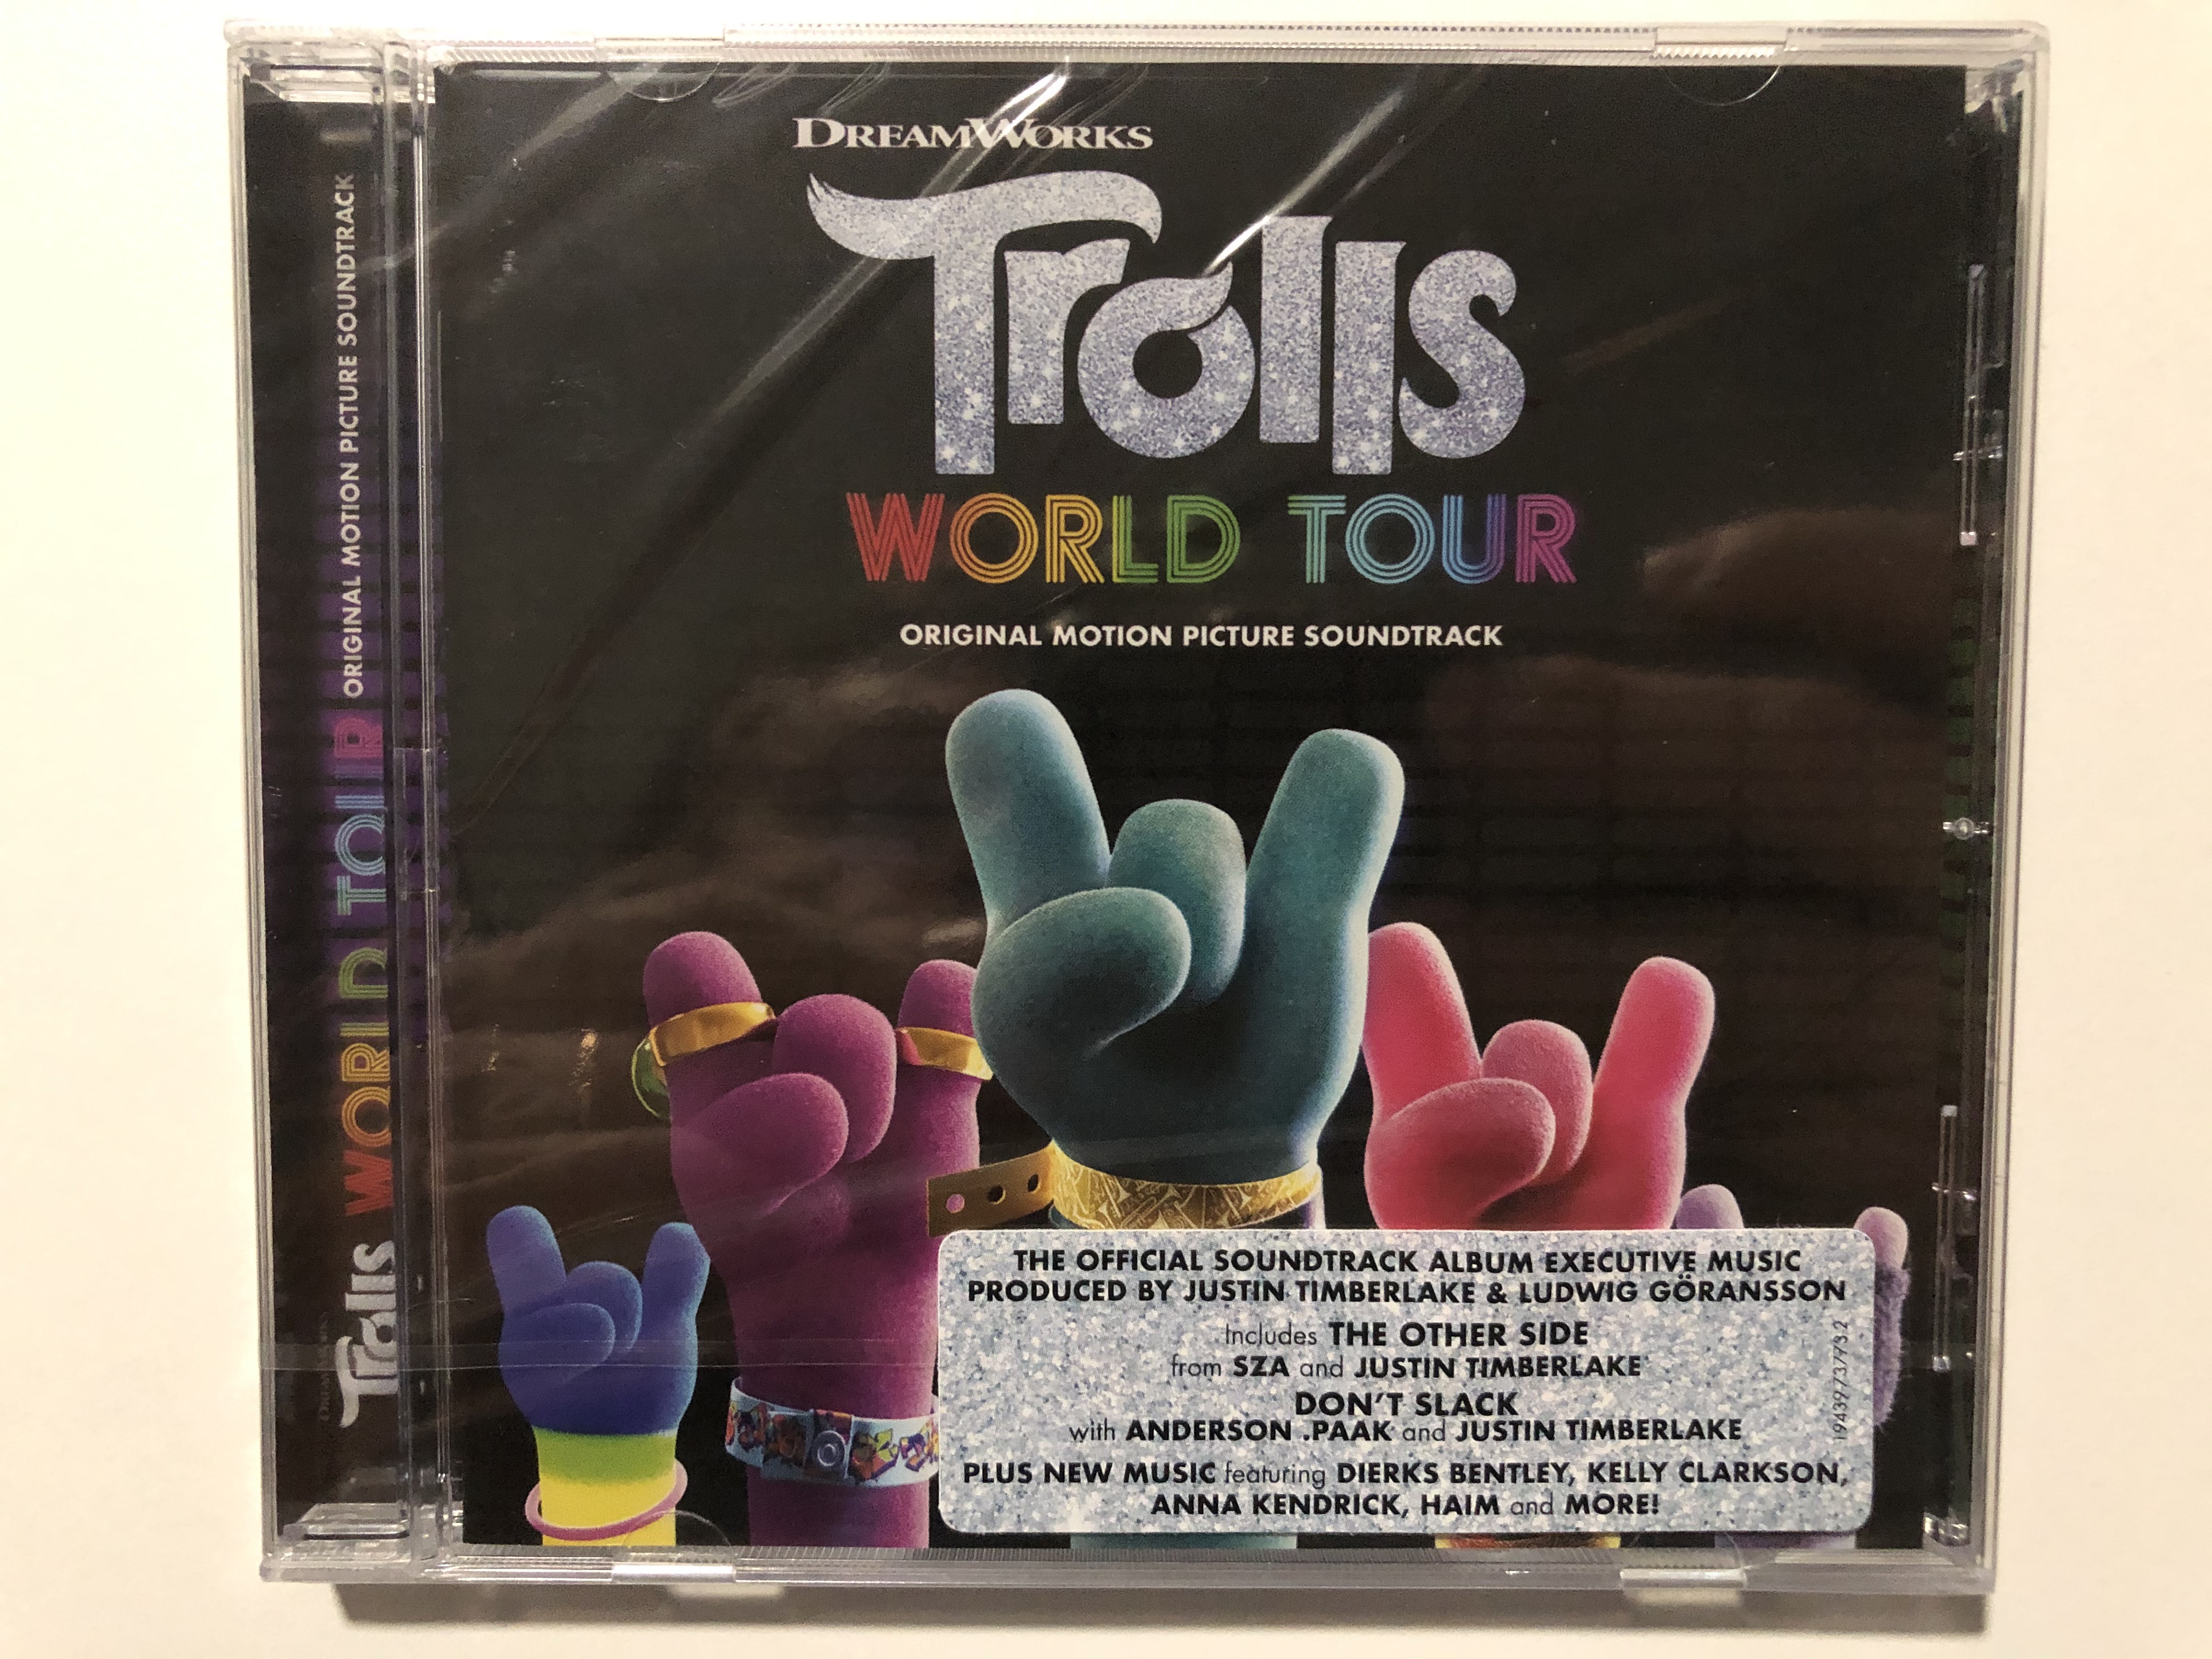 dream-works-trolls-world-tour-original-motion-picture-soundtrack-the-offical-soundtrack-album-executive-music-produced-by-justin-timberlake-ludwig-goransson-rca-audio-cd-2020-19439-7-1-.jpg